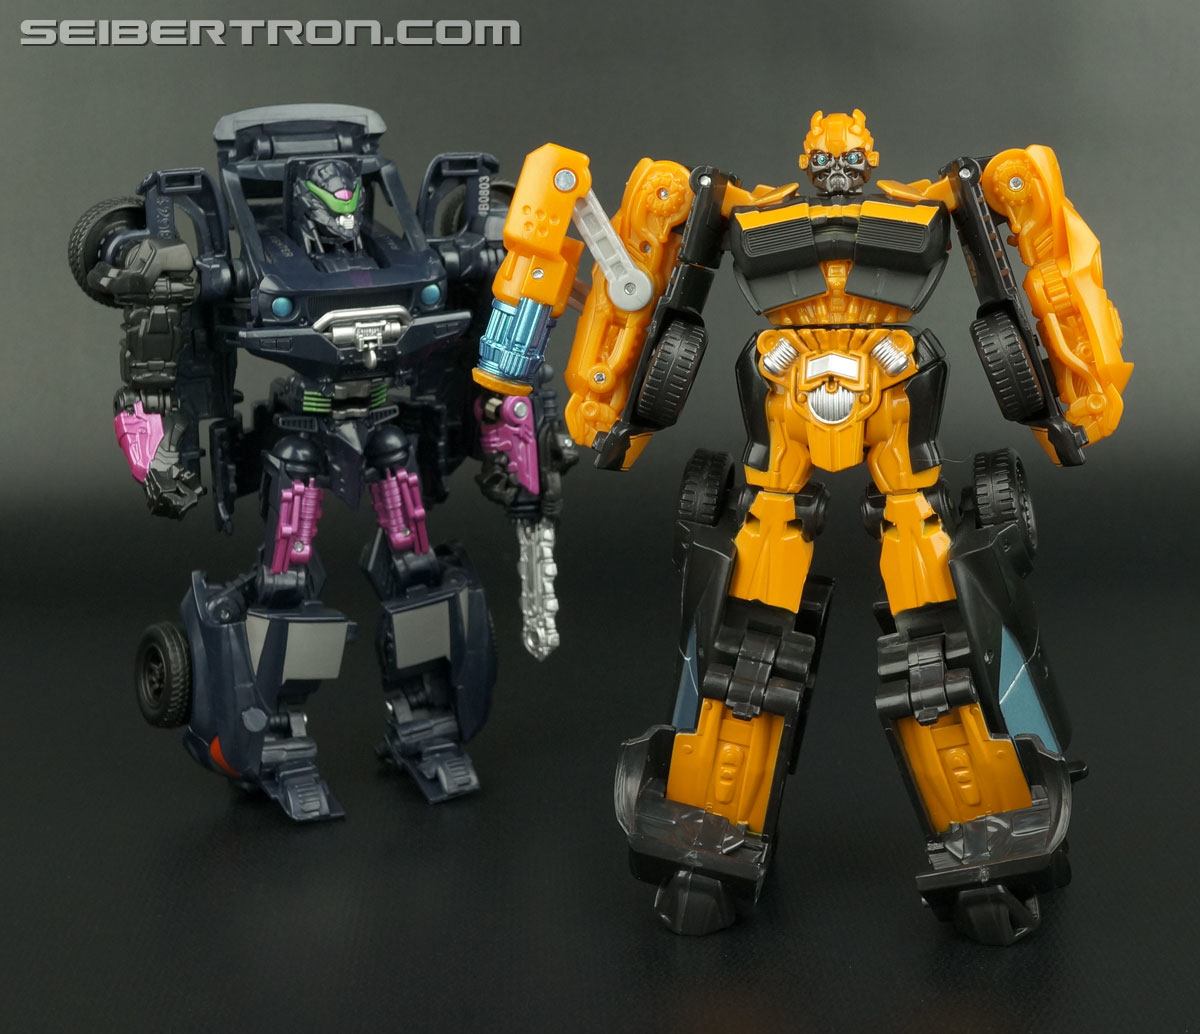 Transformers Age of Extinction: Robots In Disguise High Octane Bumblebee (Image #88 of 98)